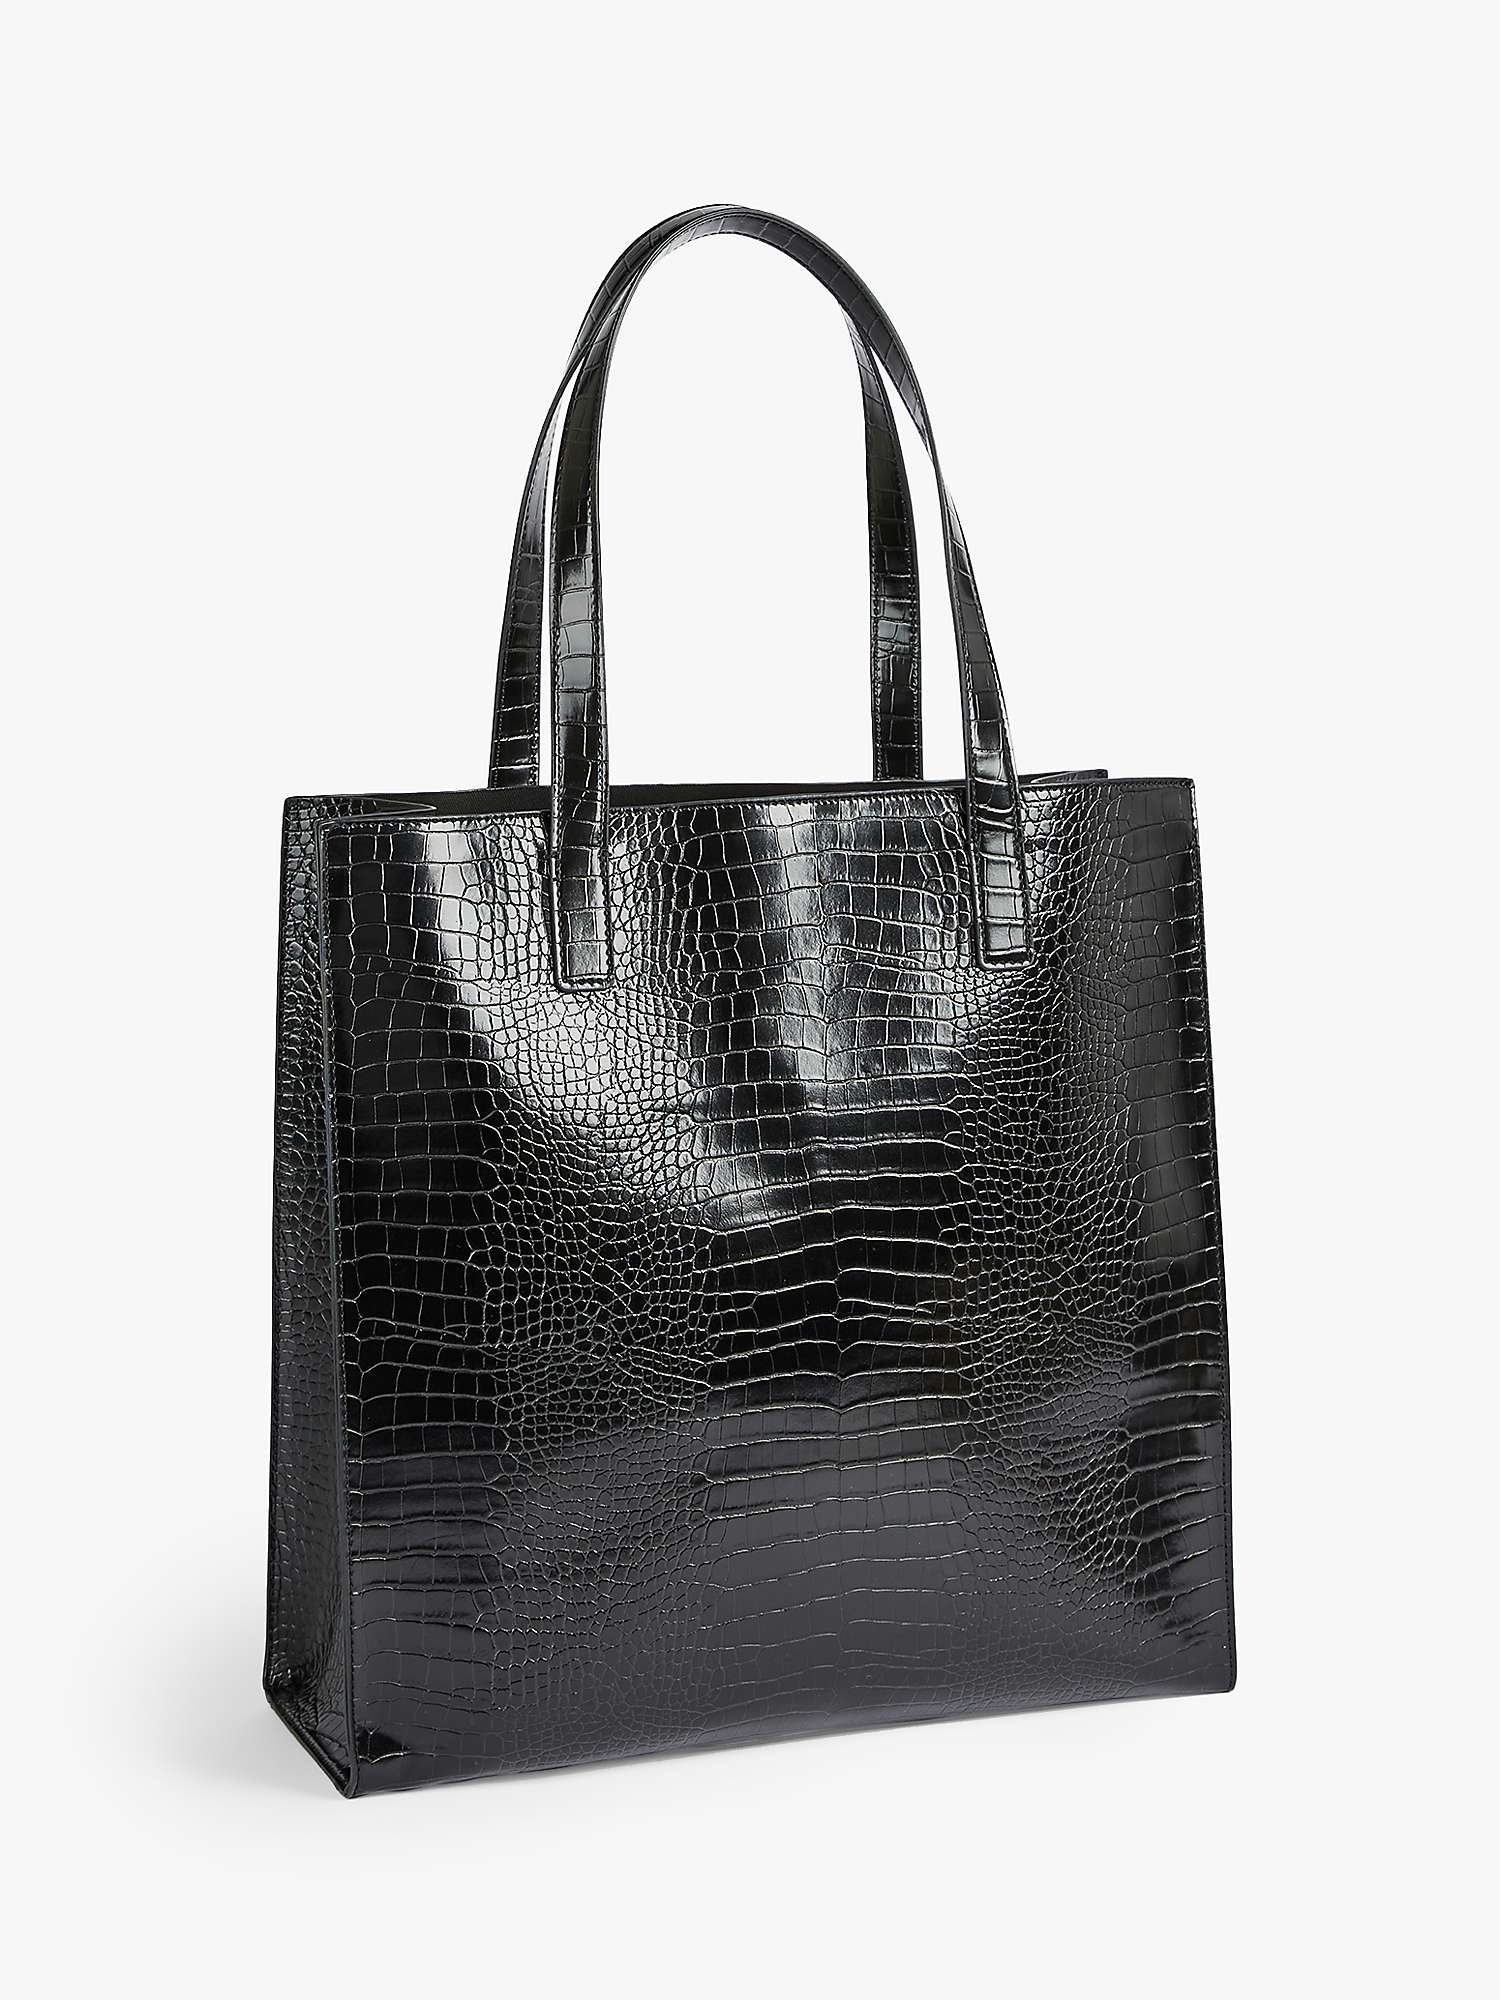 Ted Baker Croccon Leather Large Icon Shopper Bag, Black at John Lewis ...